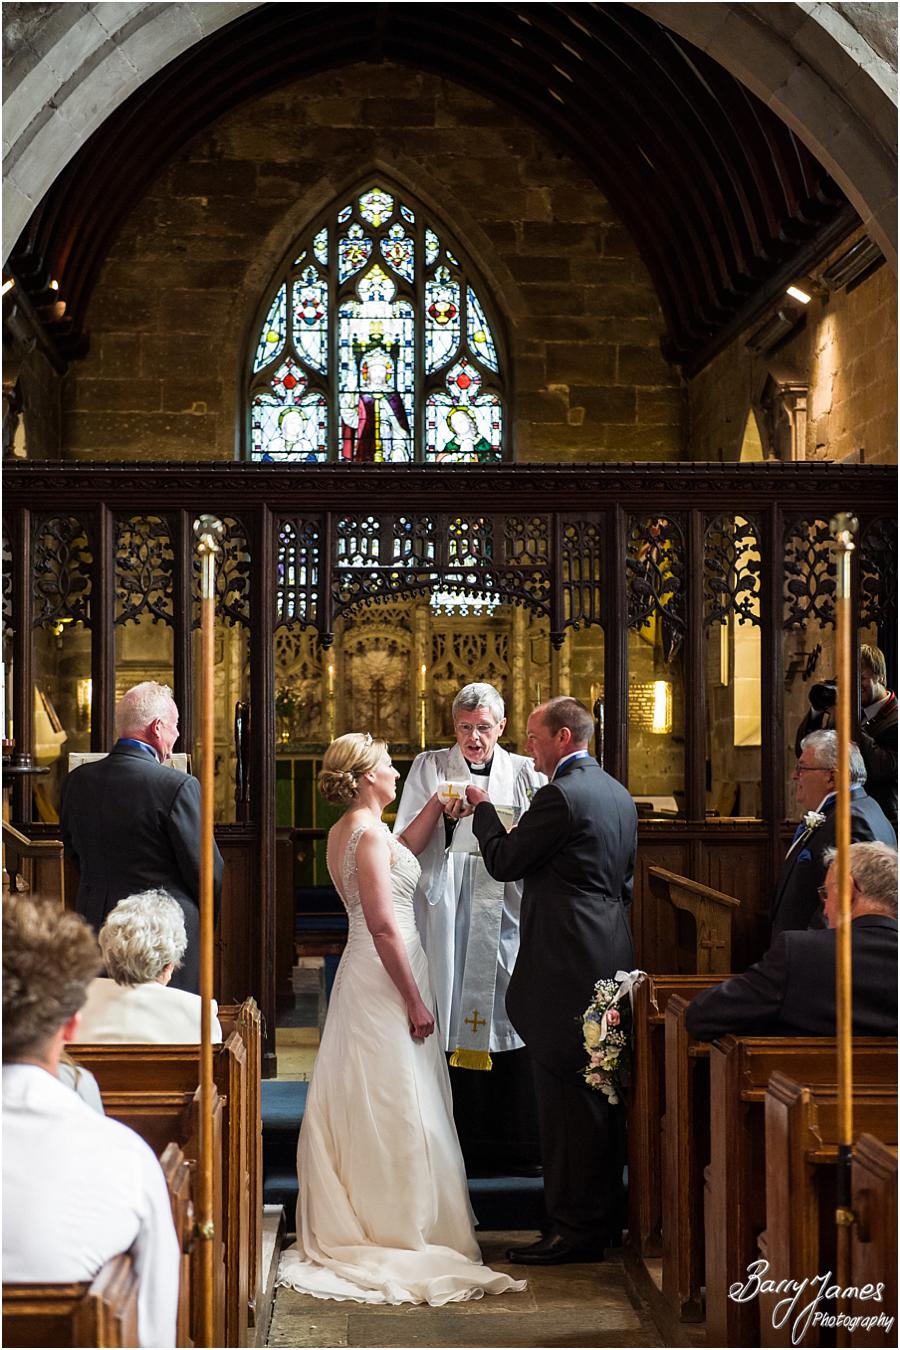 Unobtrusive storytelling wedding photographs from Kings Bromley Wedding Photographer